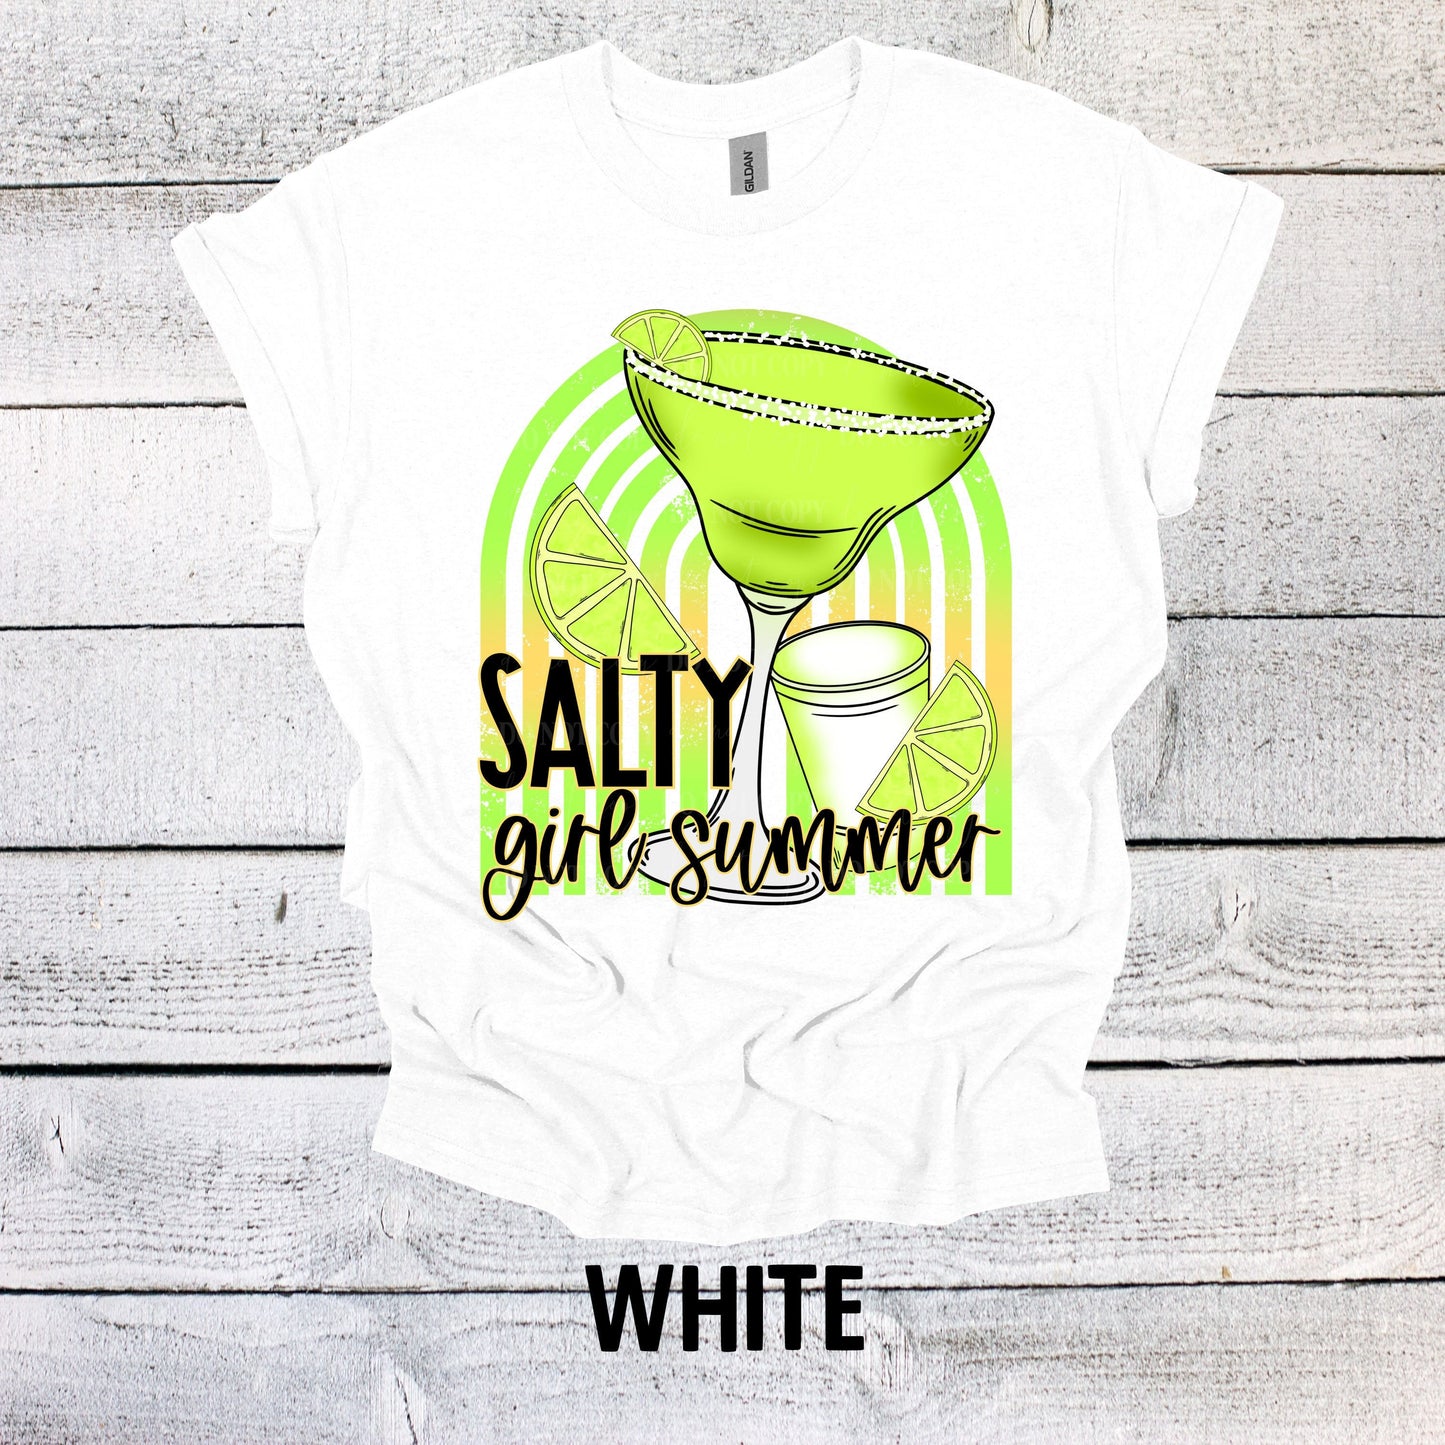 Salty Girl Summer Margarita Graphic Tee - Retro Nature Lover Shirt - Trendy Bug Print Top for Nature Enthusiasts